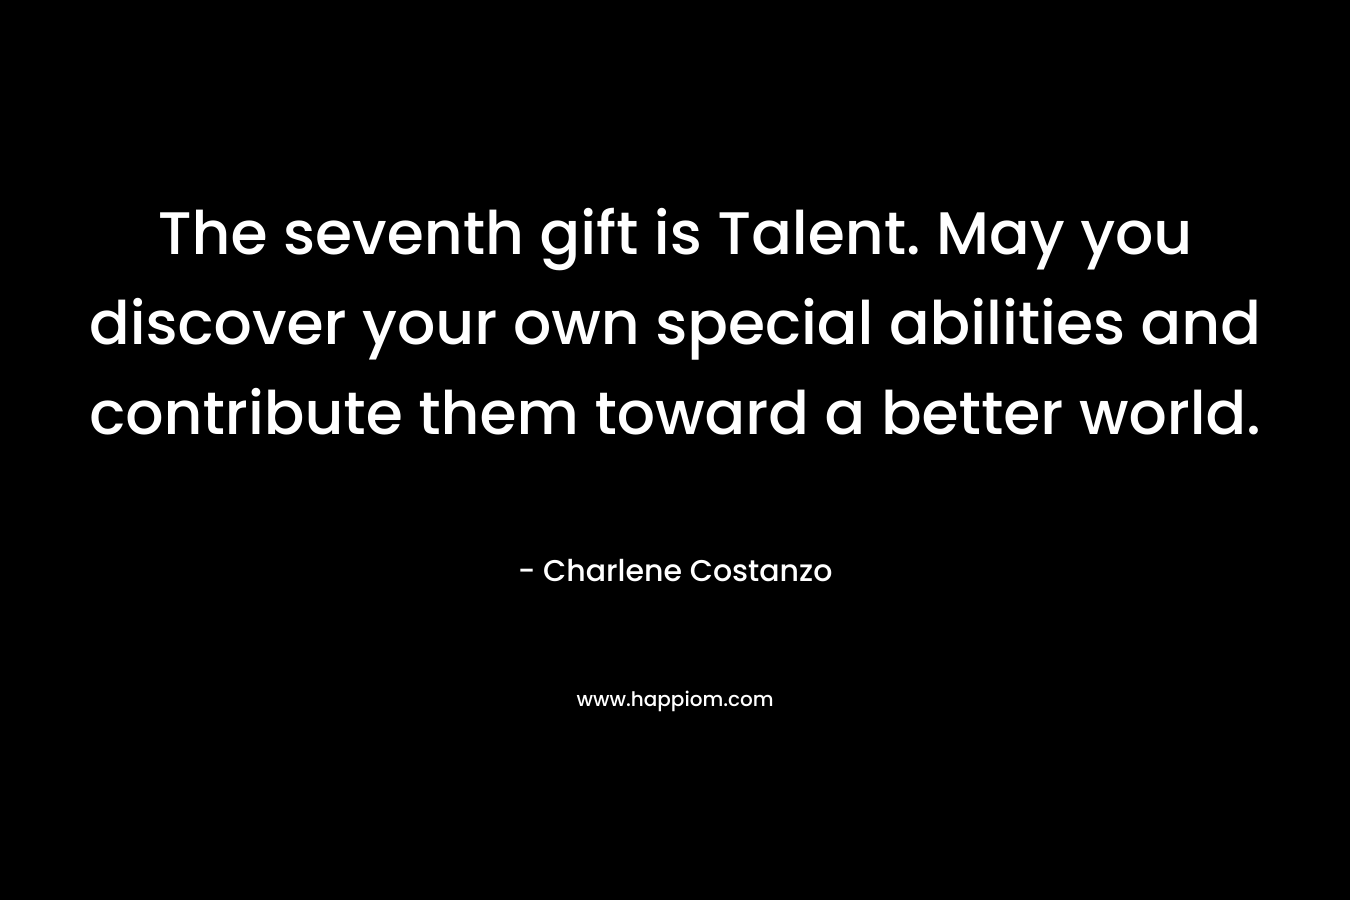 The seventh gift is Talent. May you discover your own special abilities and contribute them toward a better world. – Charlene Costanzo